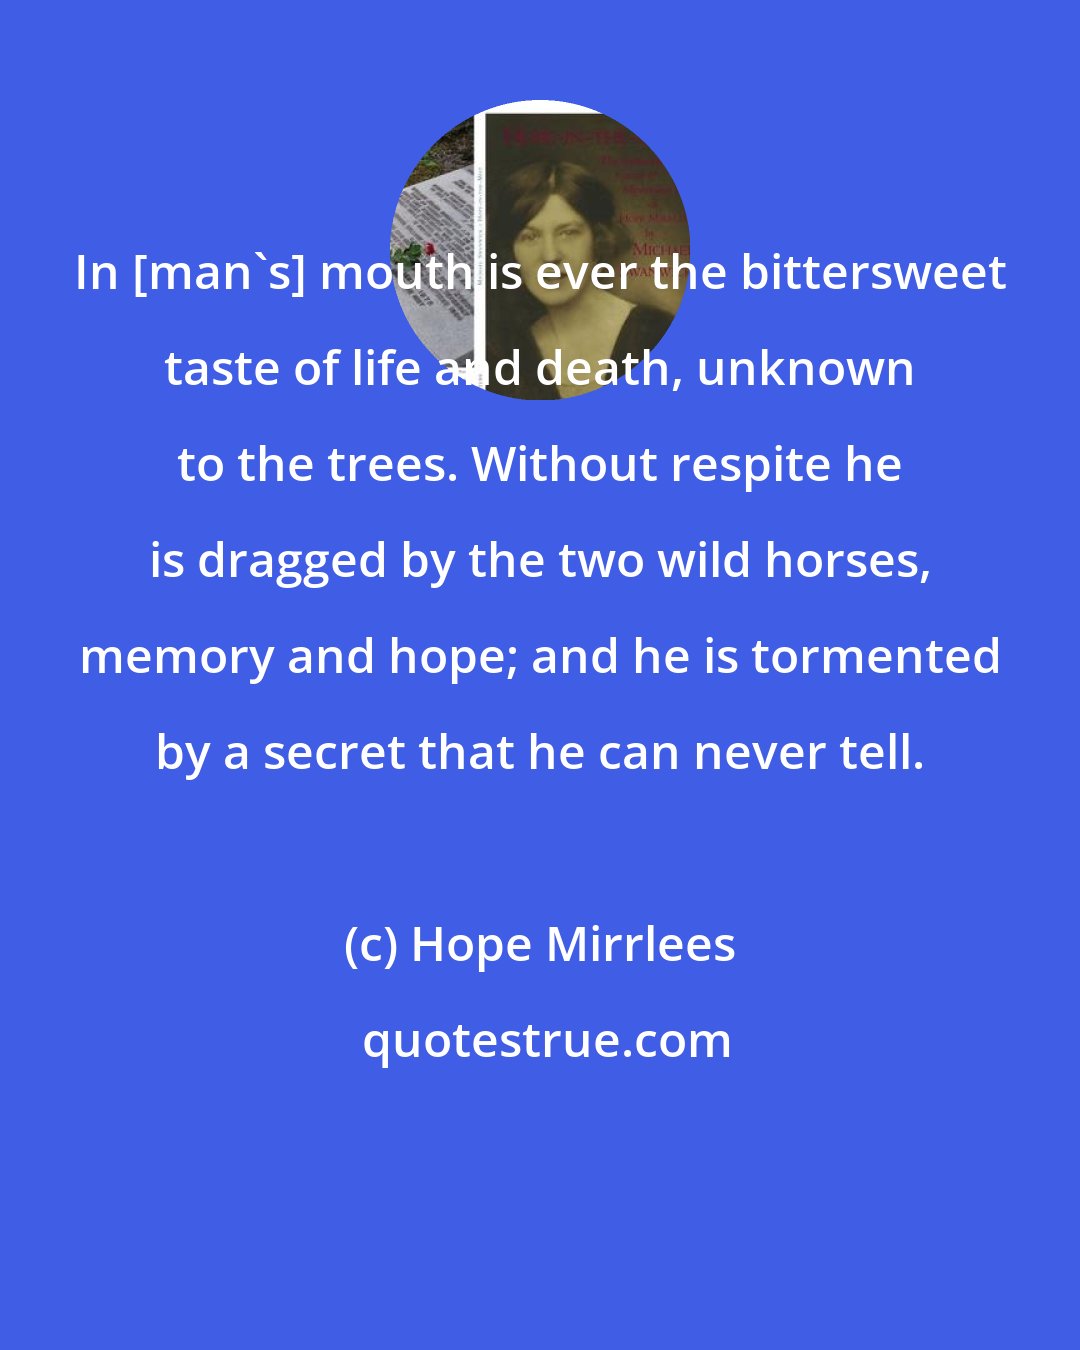 Hope Mirrlees: In [man's] mouth is ever the bittersweet taste of life and death, unknown to the trees. Without respite he is dragged by the two wild horses, memory and hope; and he is tormented by a secret that he can never tell.